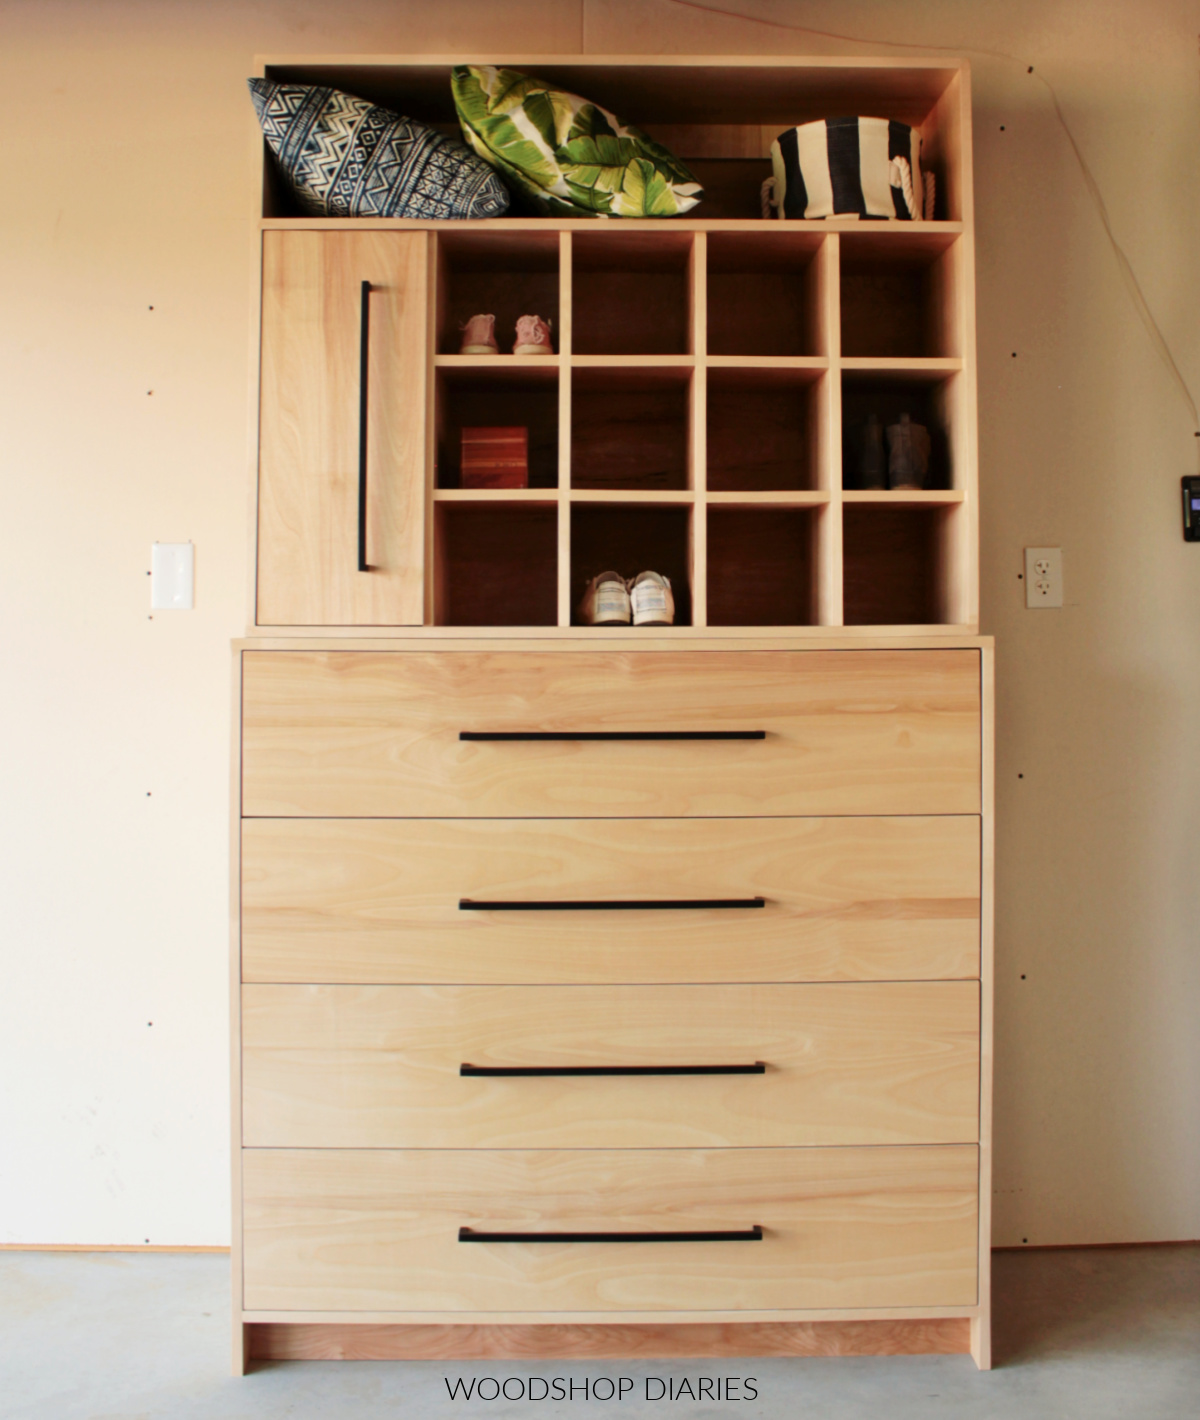 https://www.woodshopdiaries.com/wp-content/uploads/2021/07/DIY-closet-cabinet-system-small.jpg